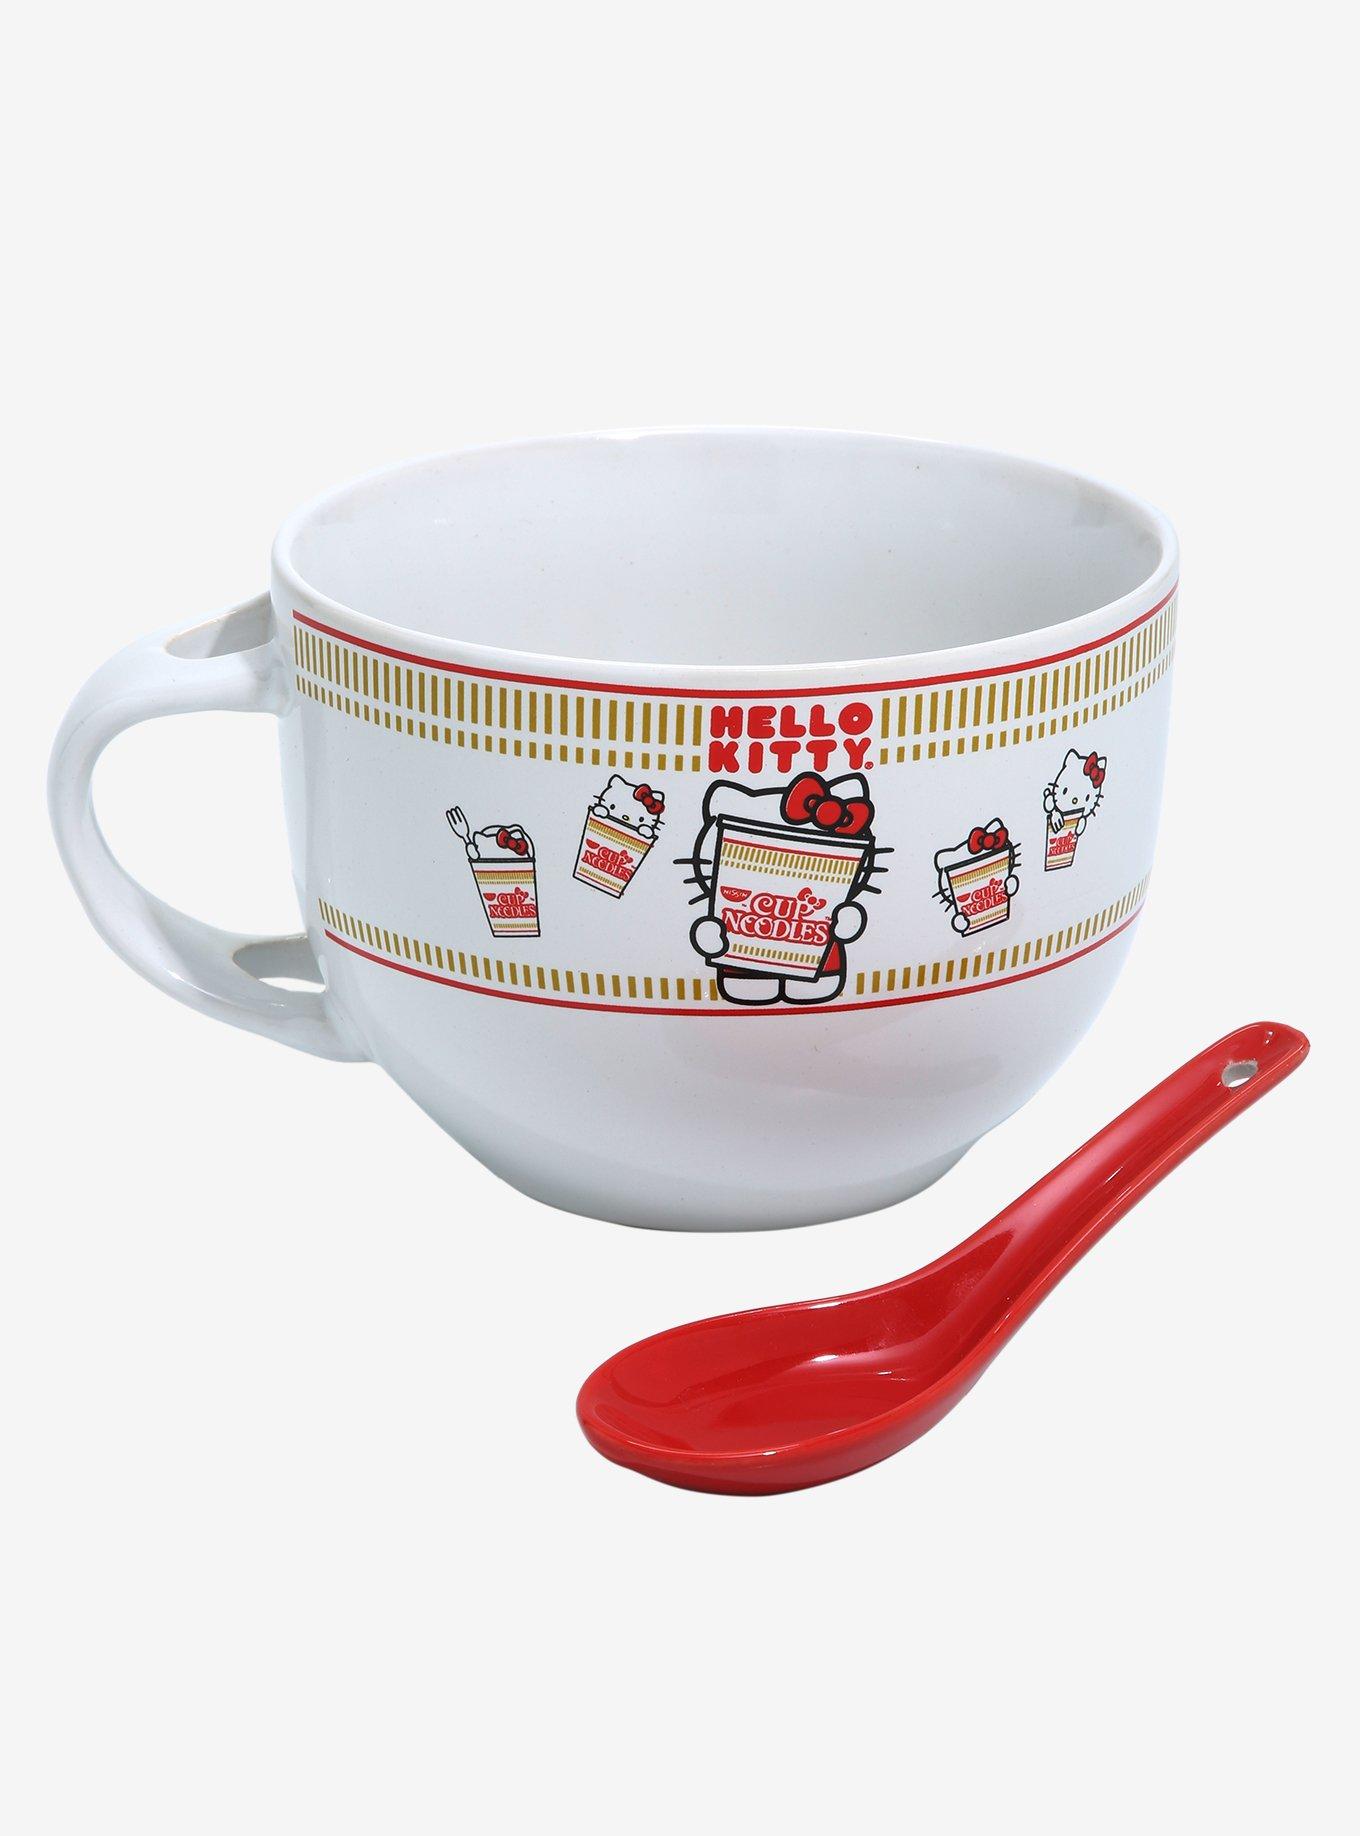 Sanrio Hello Kitty x Nissin Cup Noodles Soup Mug With Spoon | Holds 24  Ounces